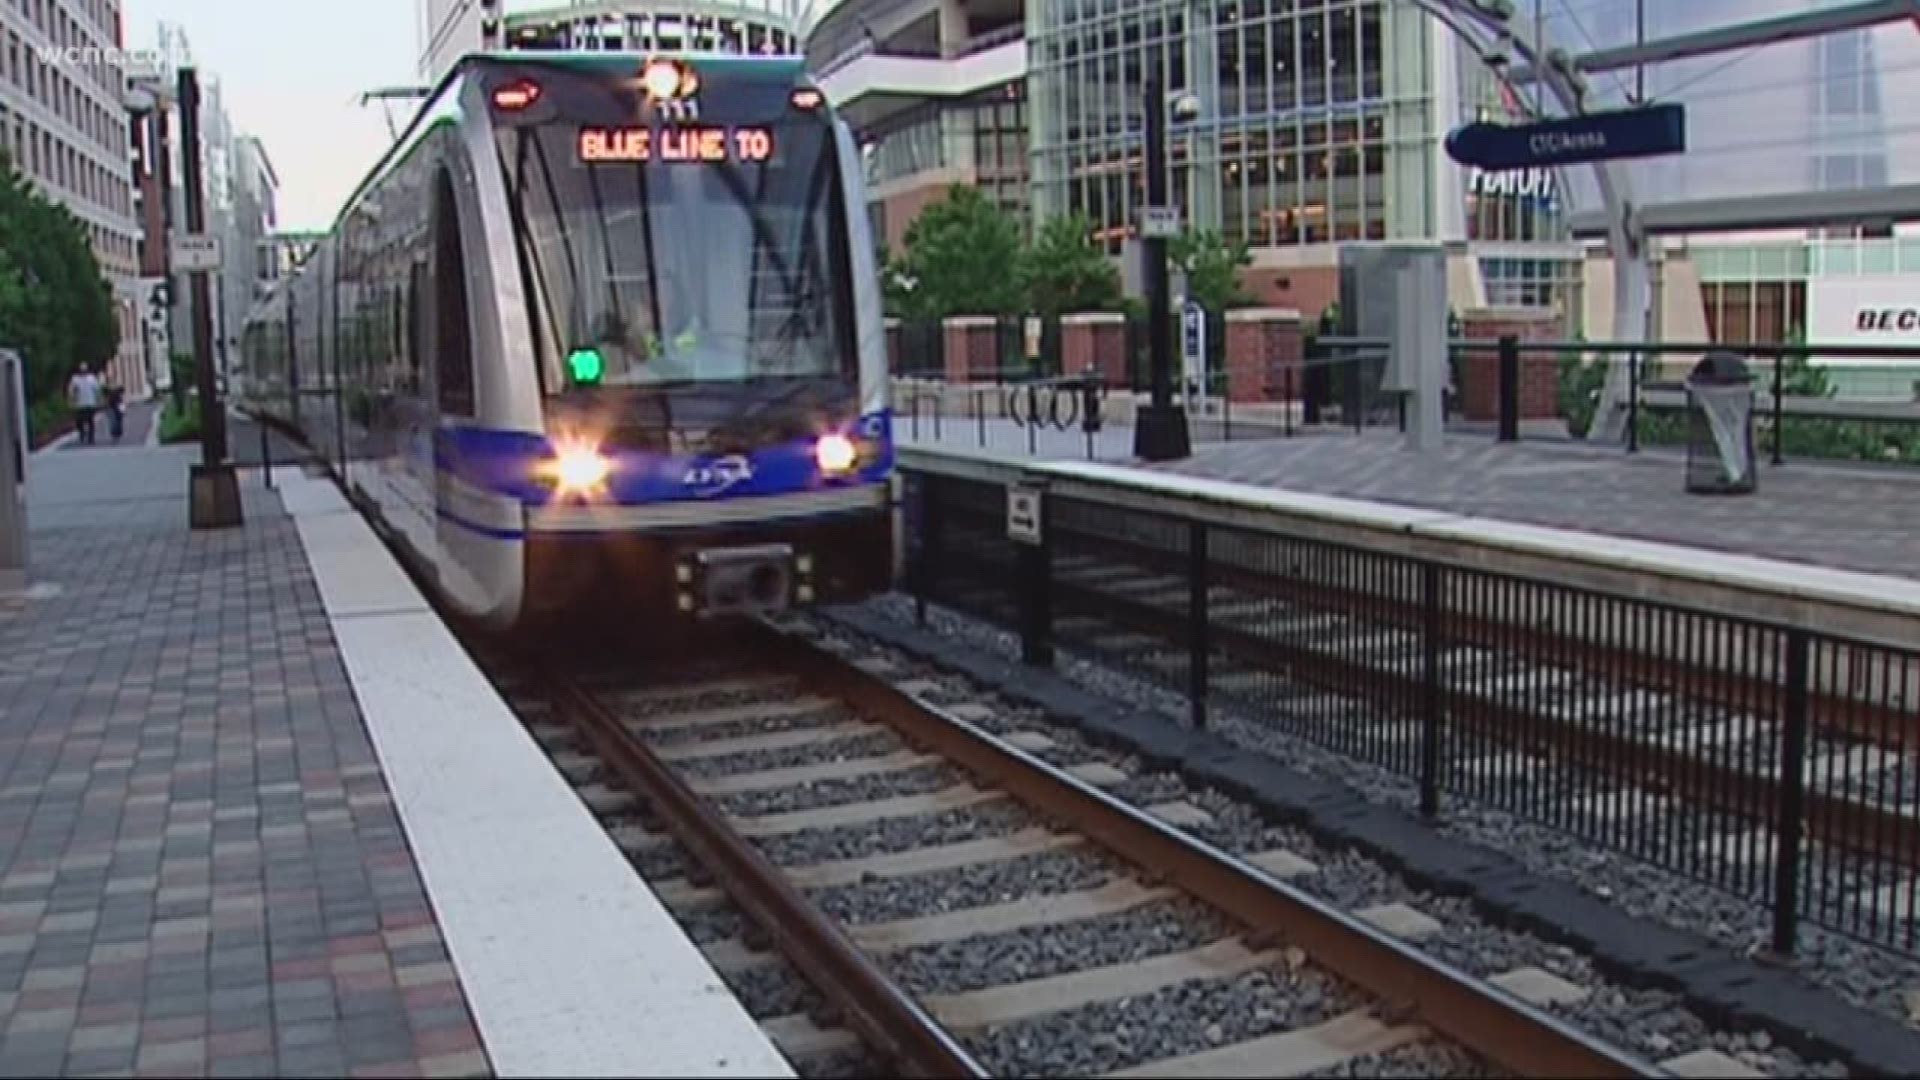 Plans for a new light rail from Matthews to Belmont are moving forward after a unanimous vote from the Metropolitan Transit Commission.